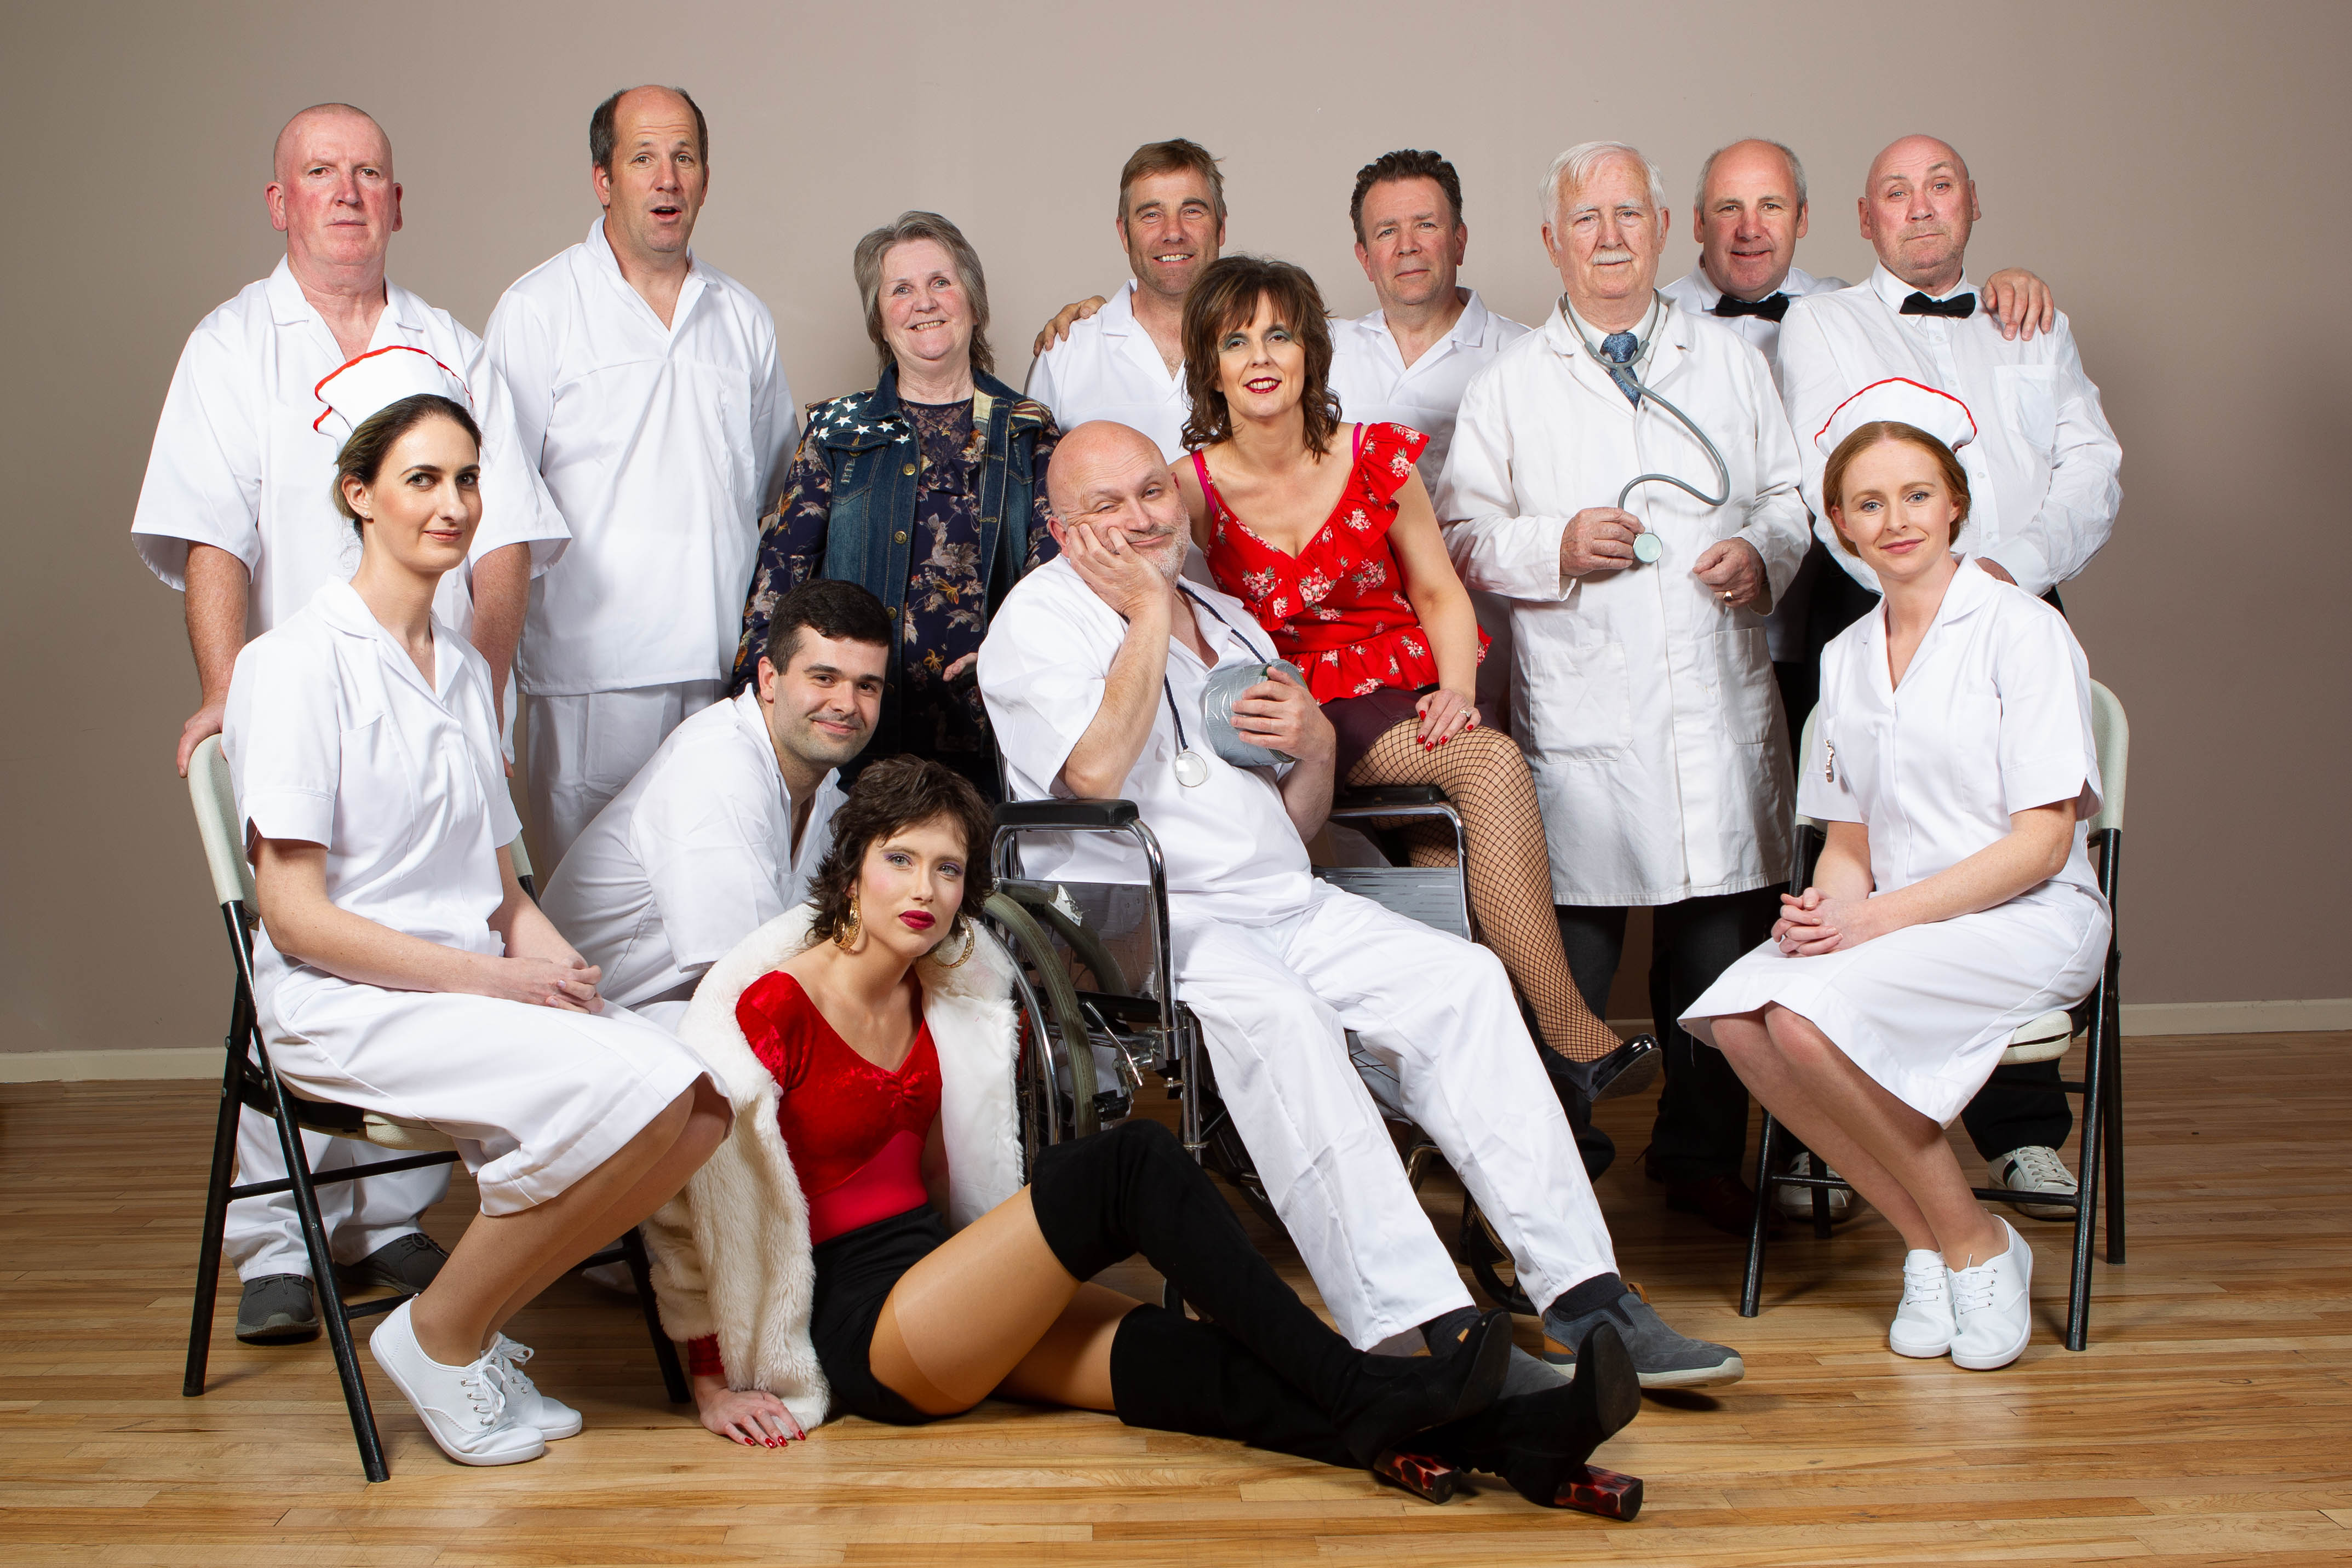 Review Of One Flew Over The Cuckoo S Nest By Fidelma Collins Clonmel Theatre Guild